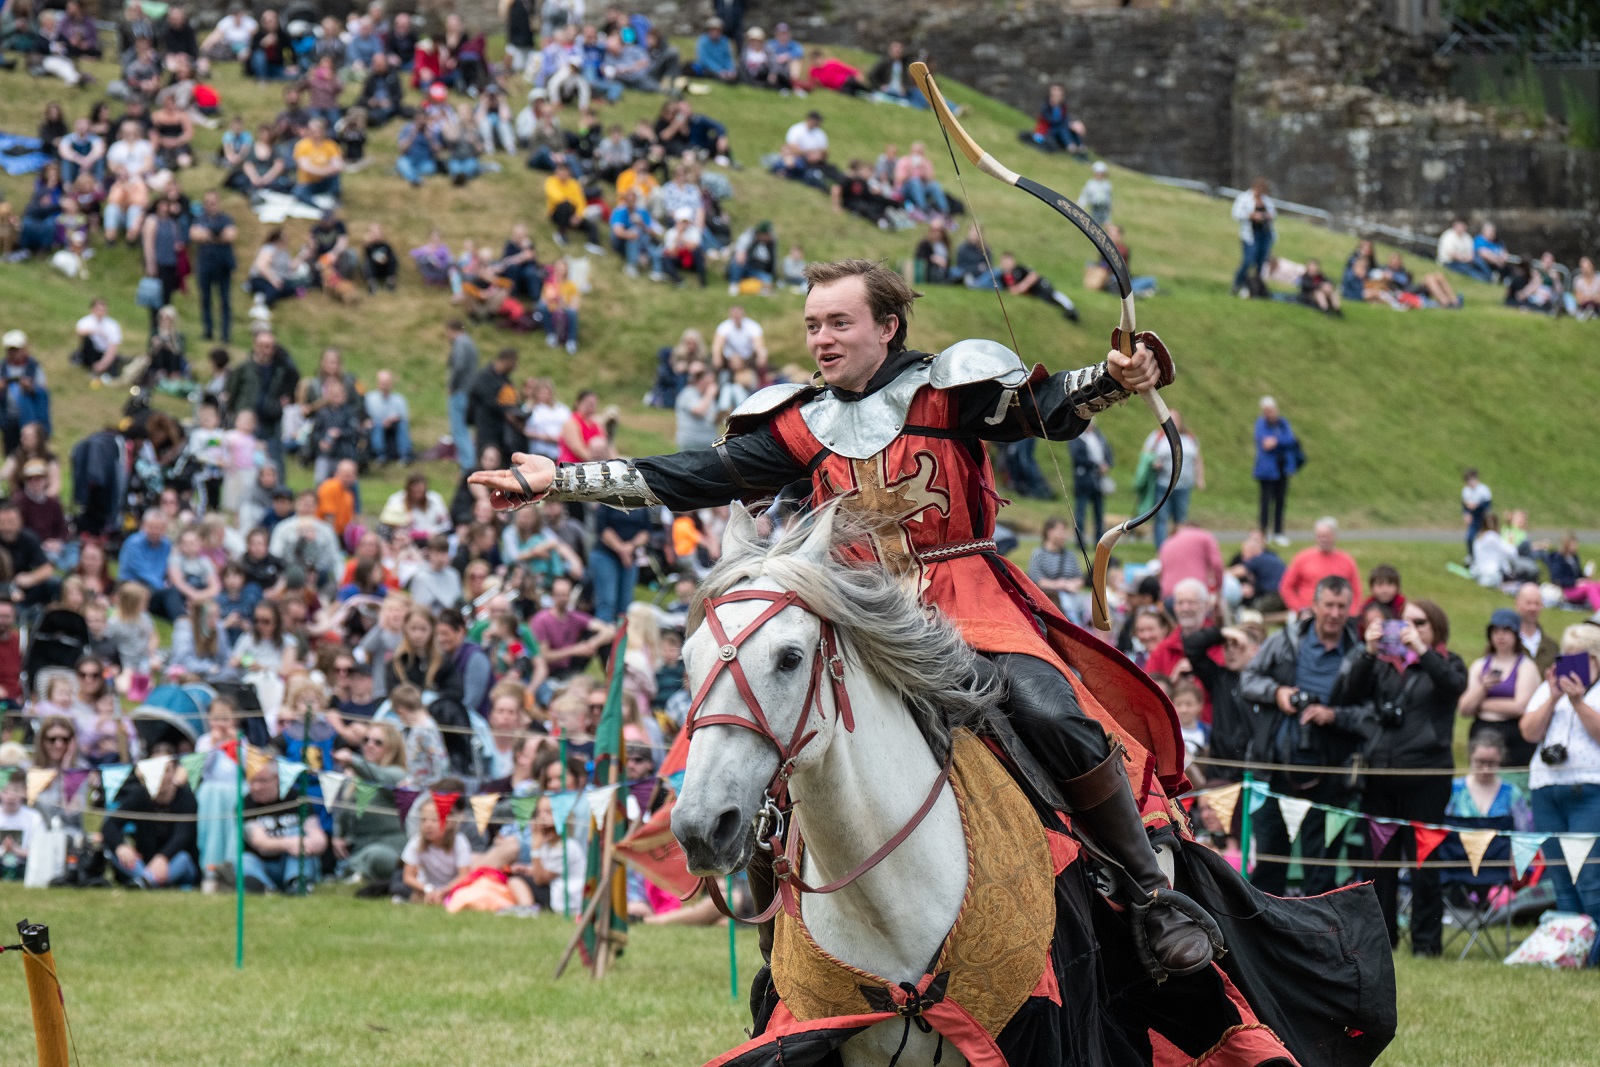 Knight on a horse riding. He's carrying a bow and arrow and looks at the audience triumphantly.